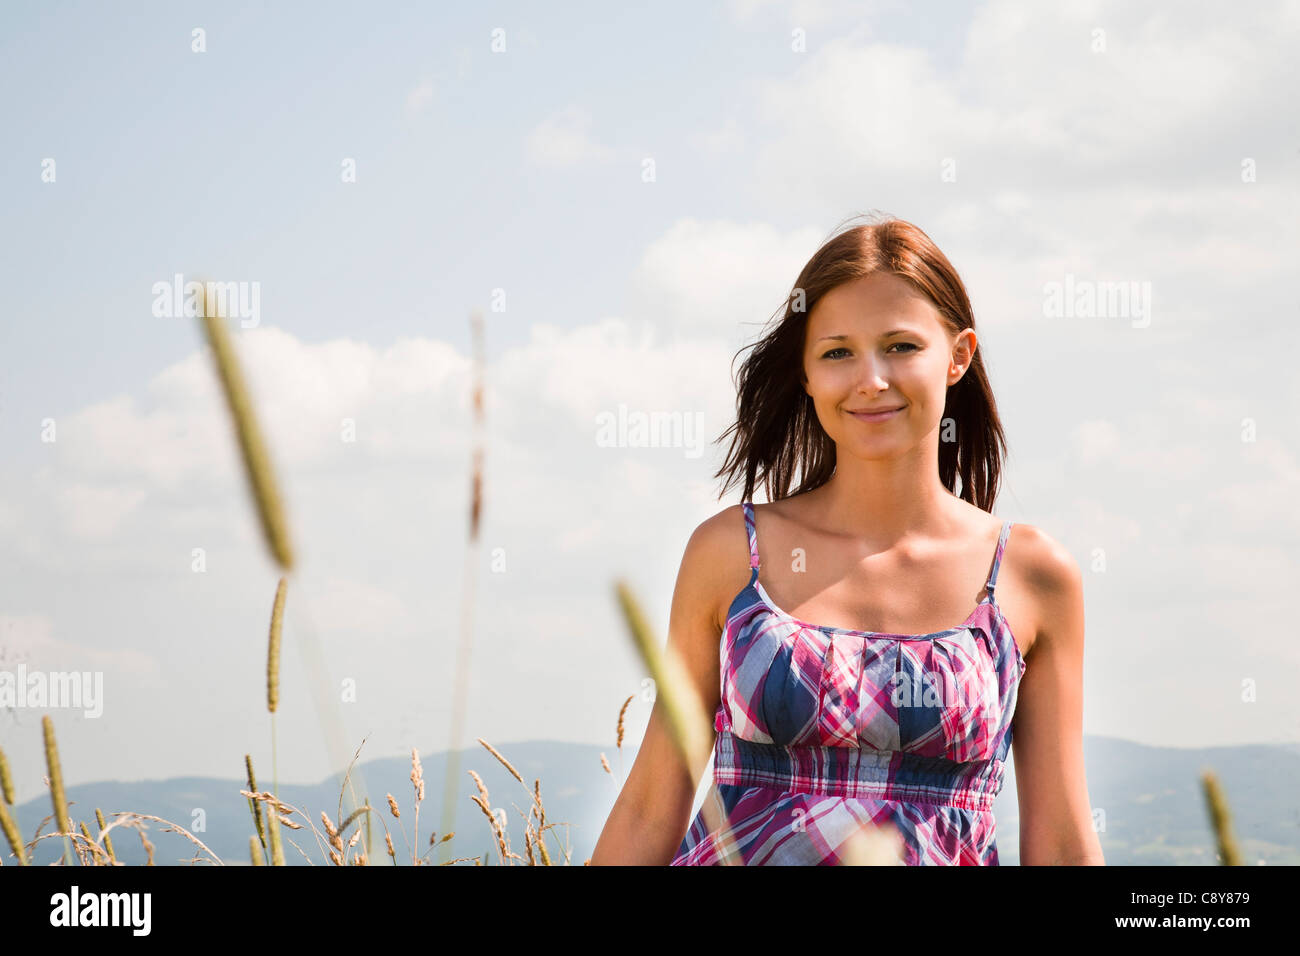 Portrait of young woman standing in field Banque D'Images